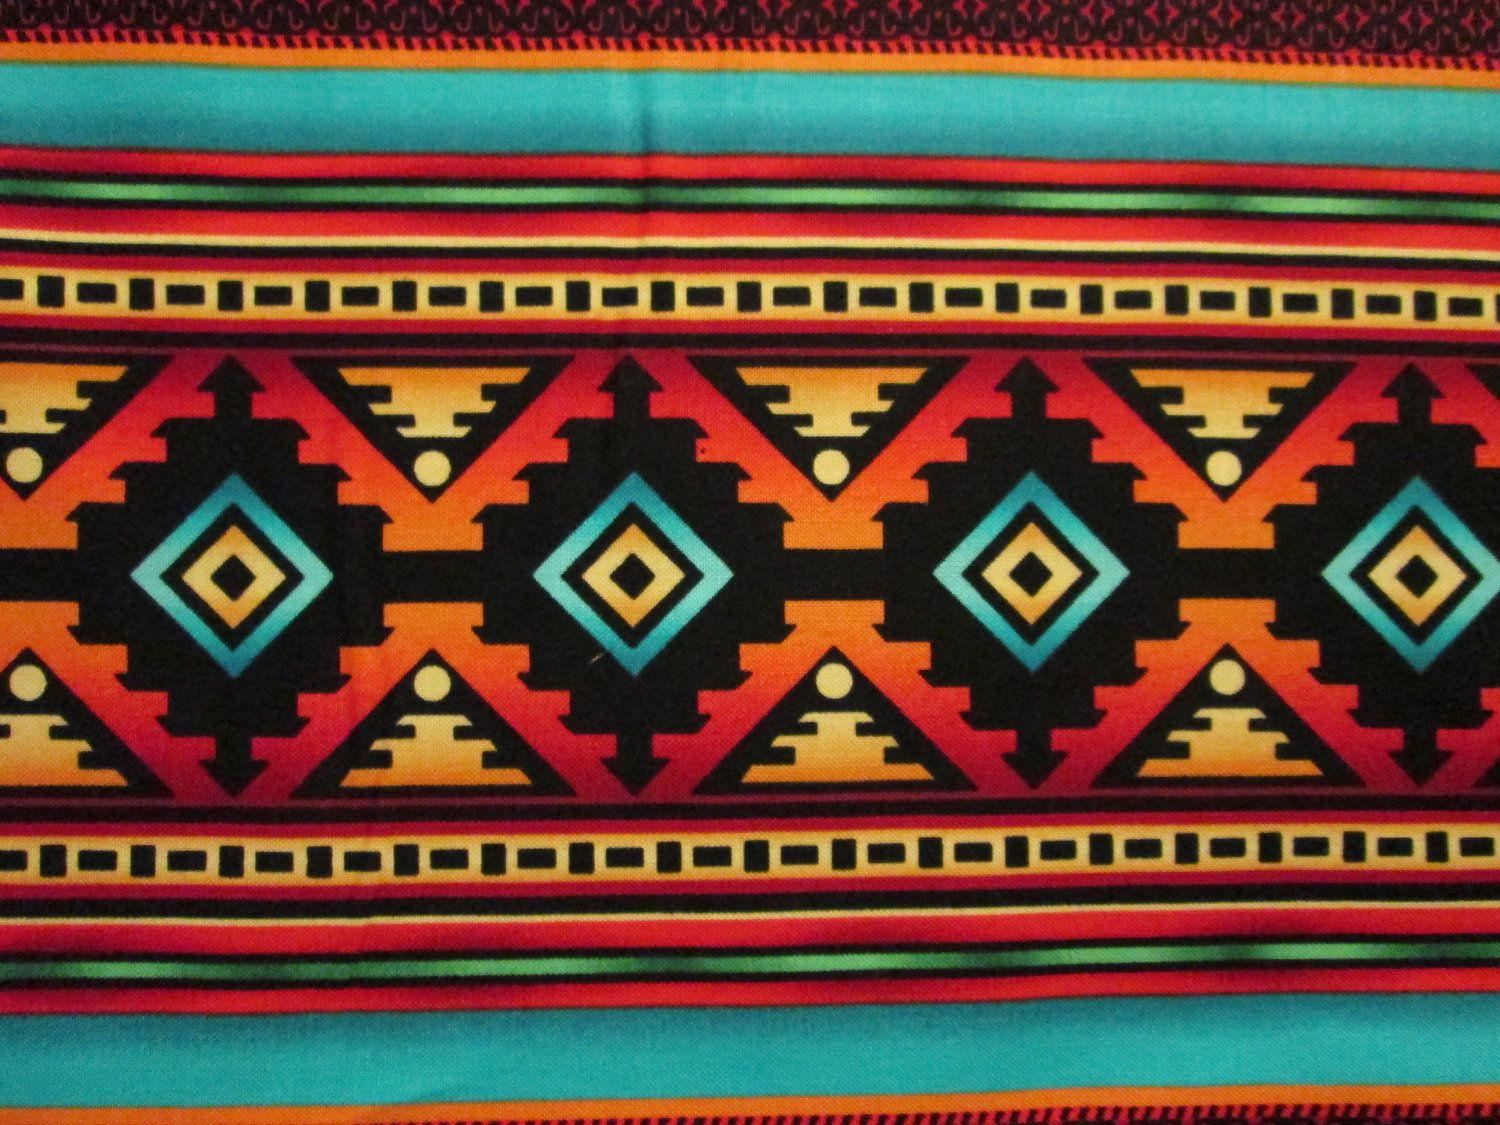 Native American Tribal Patterns Wallpapers - Top Free Native American